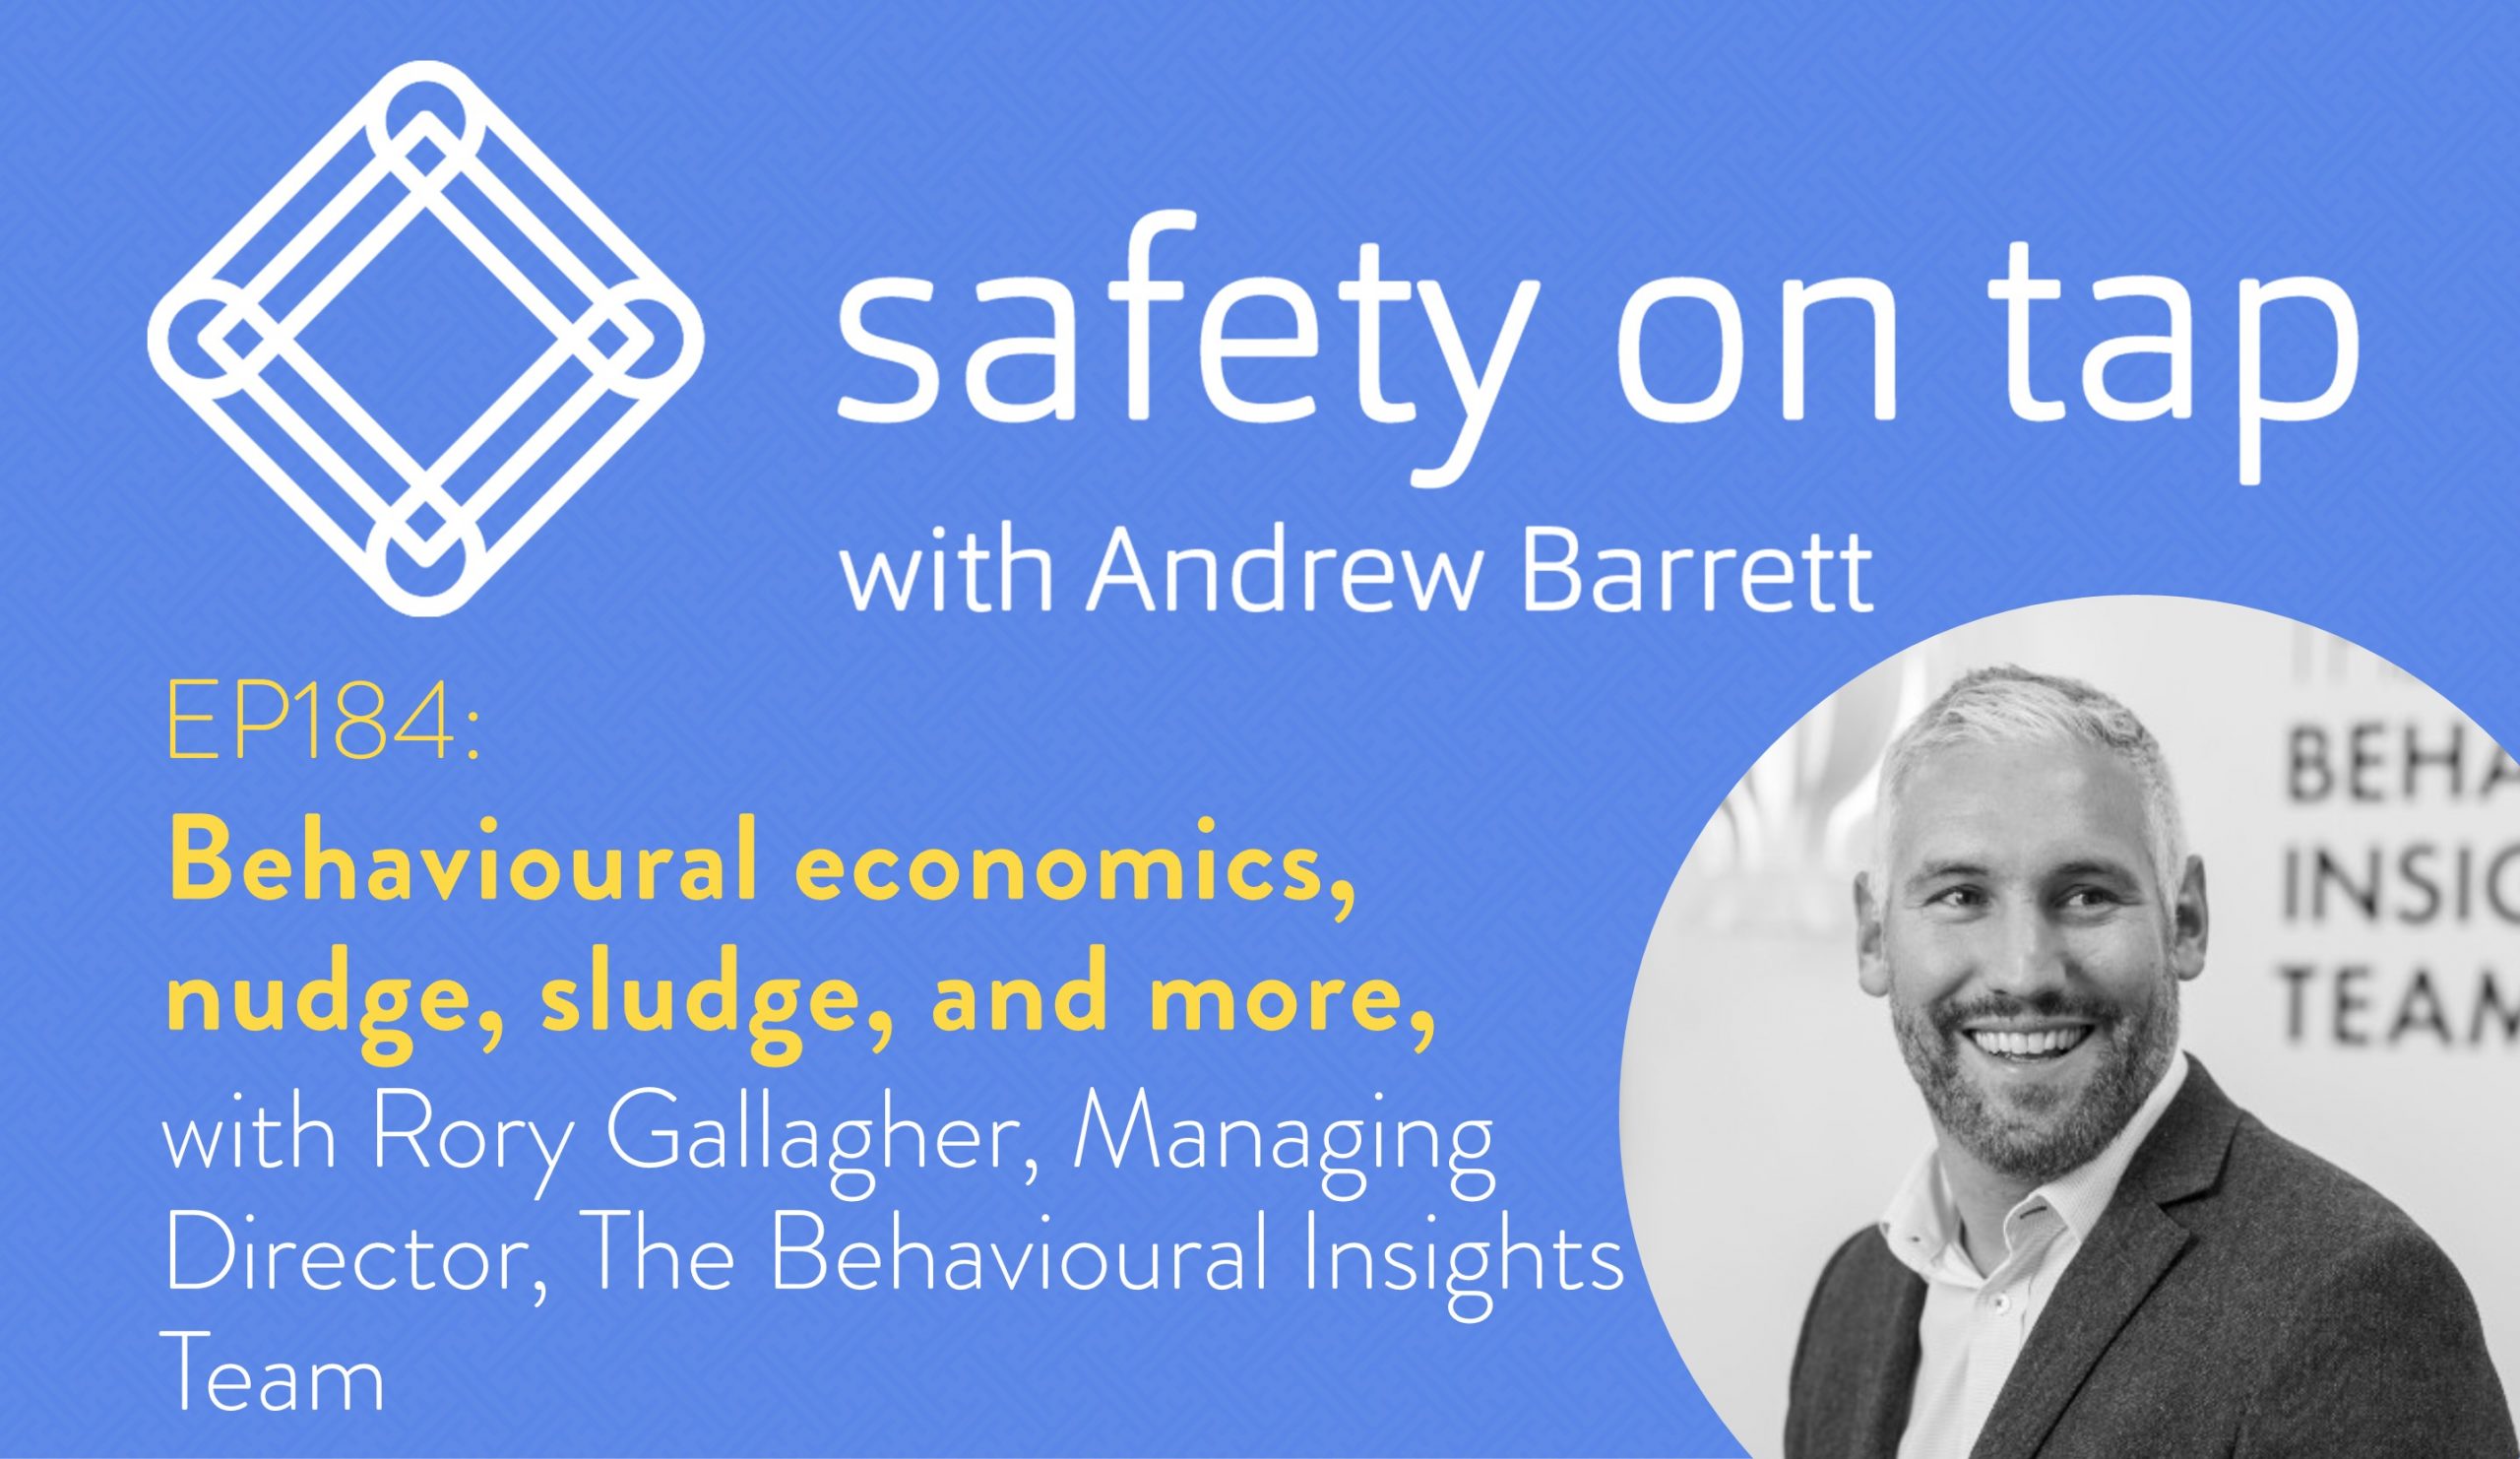 Ep184: Behavioural economics, nudge, sludge, and more, with Rory Gallagher, Managing Director, The Behavioural Insights Team